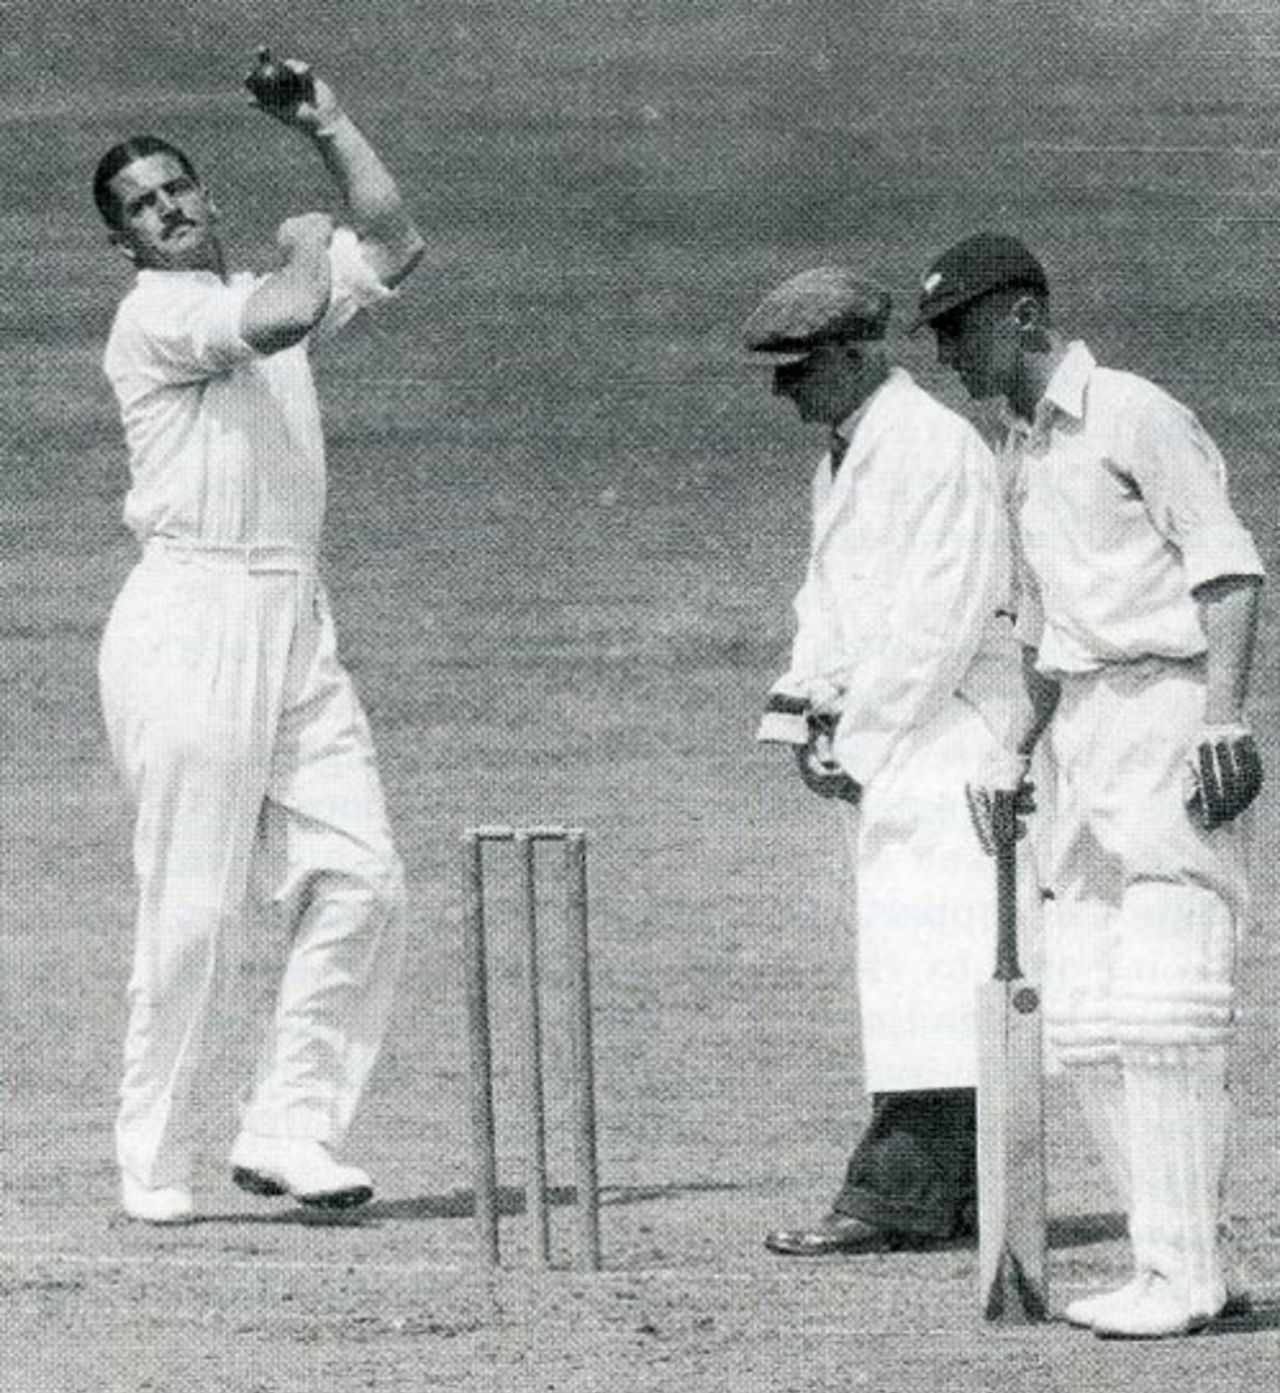 Chuck Fleetwood-Smith in action during Australia's 1938 tour of England